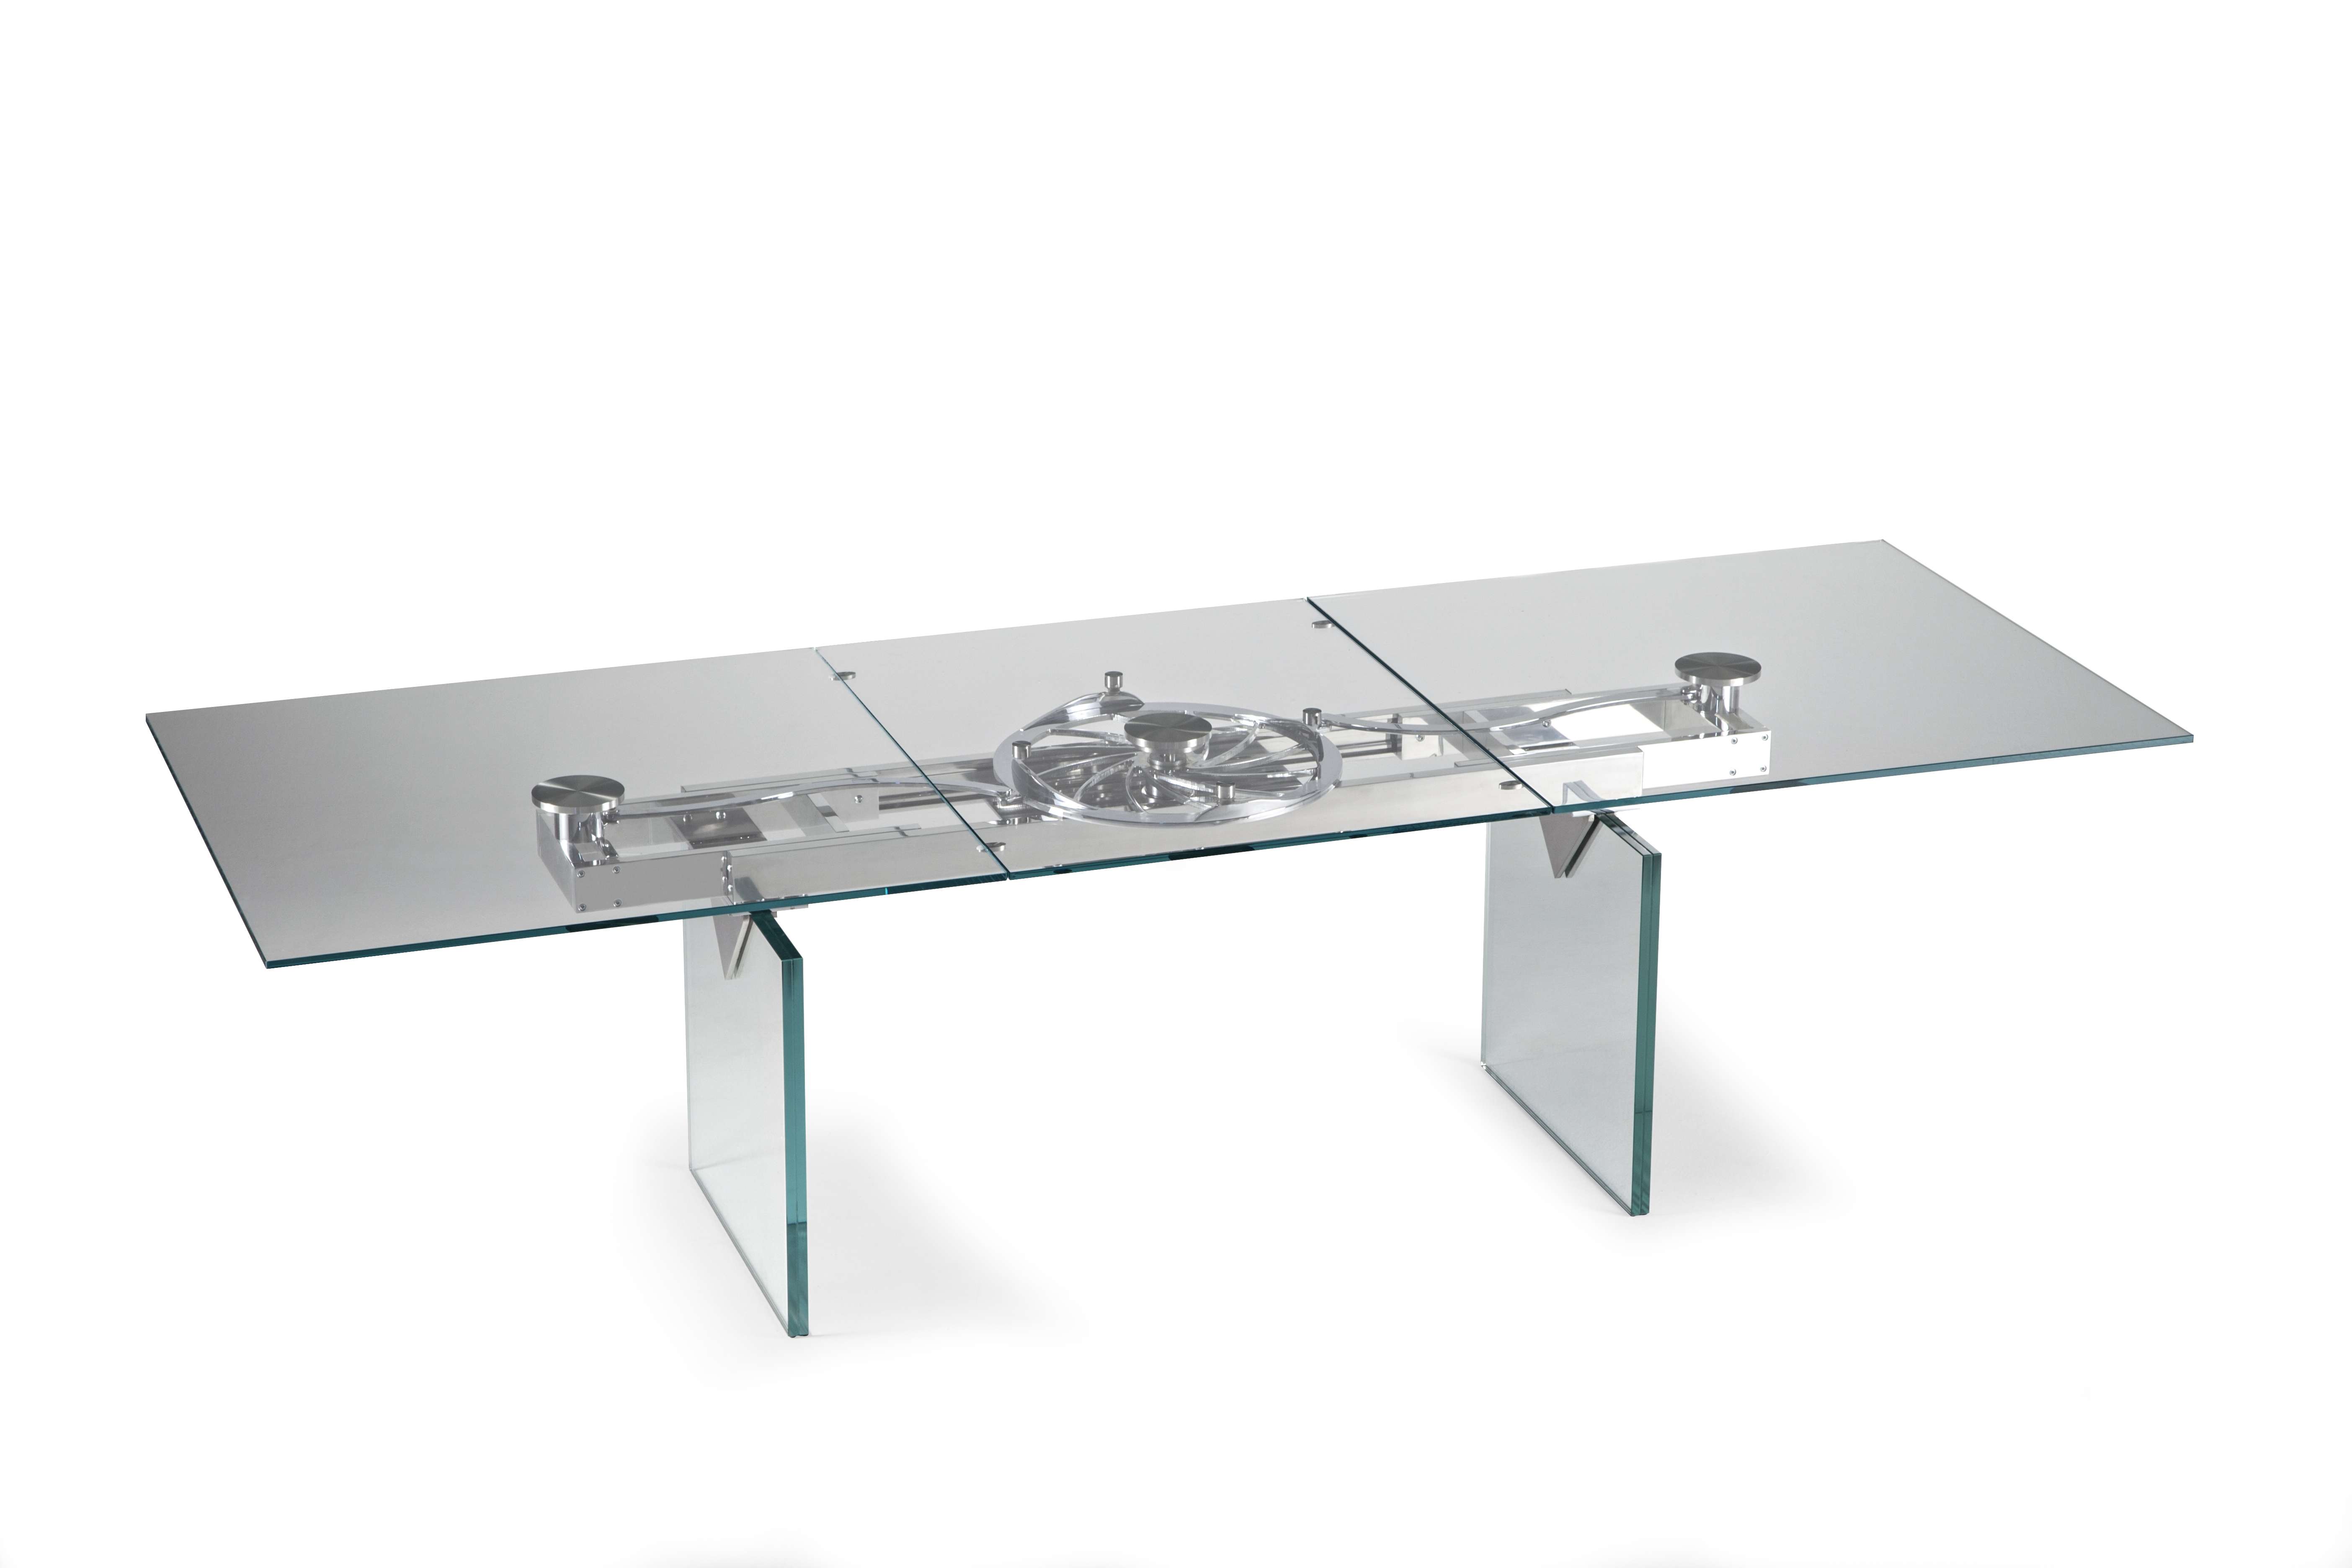 Naos’s Quasar extendable table comes with a glass or ceramics top.